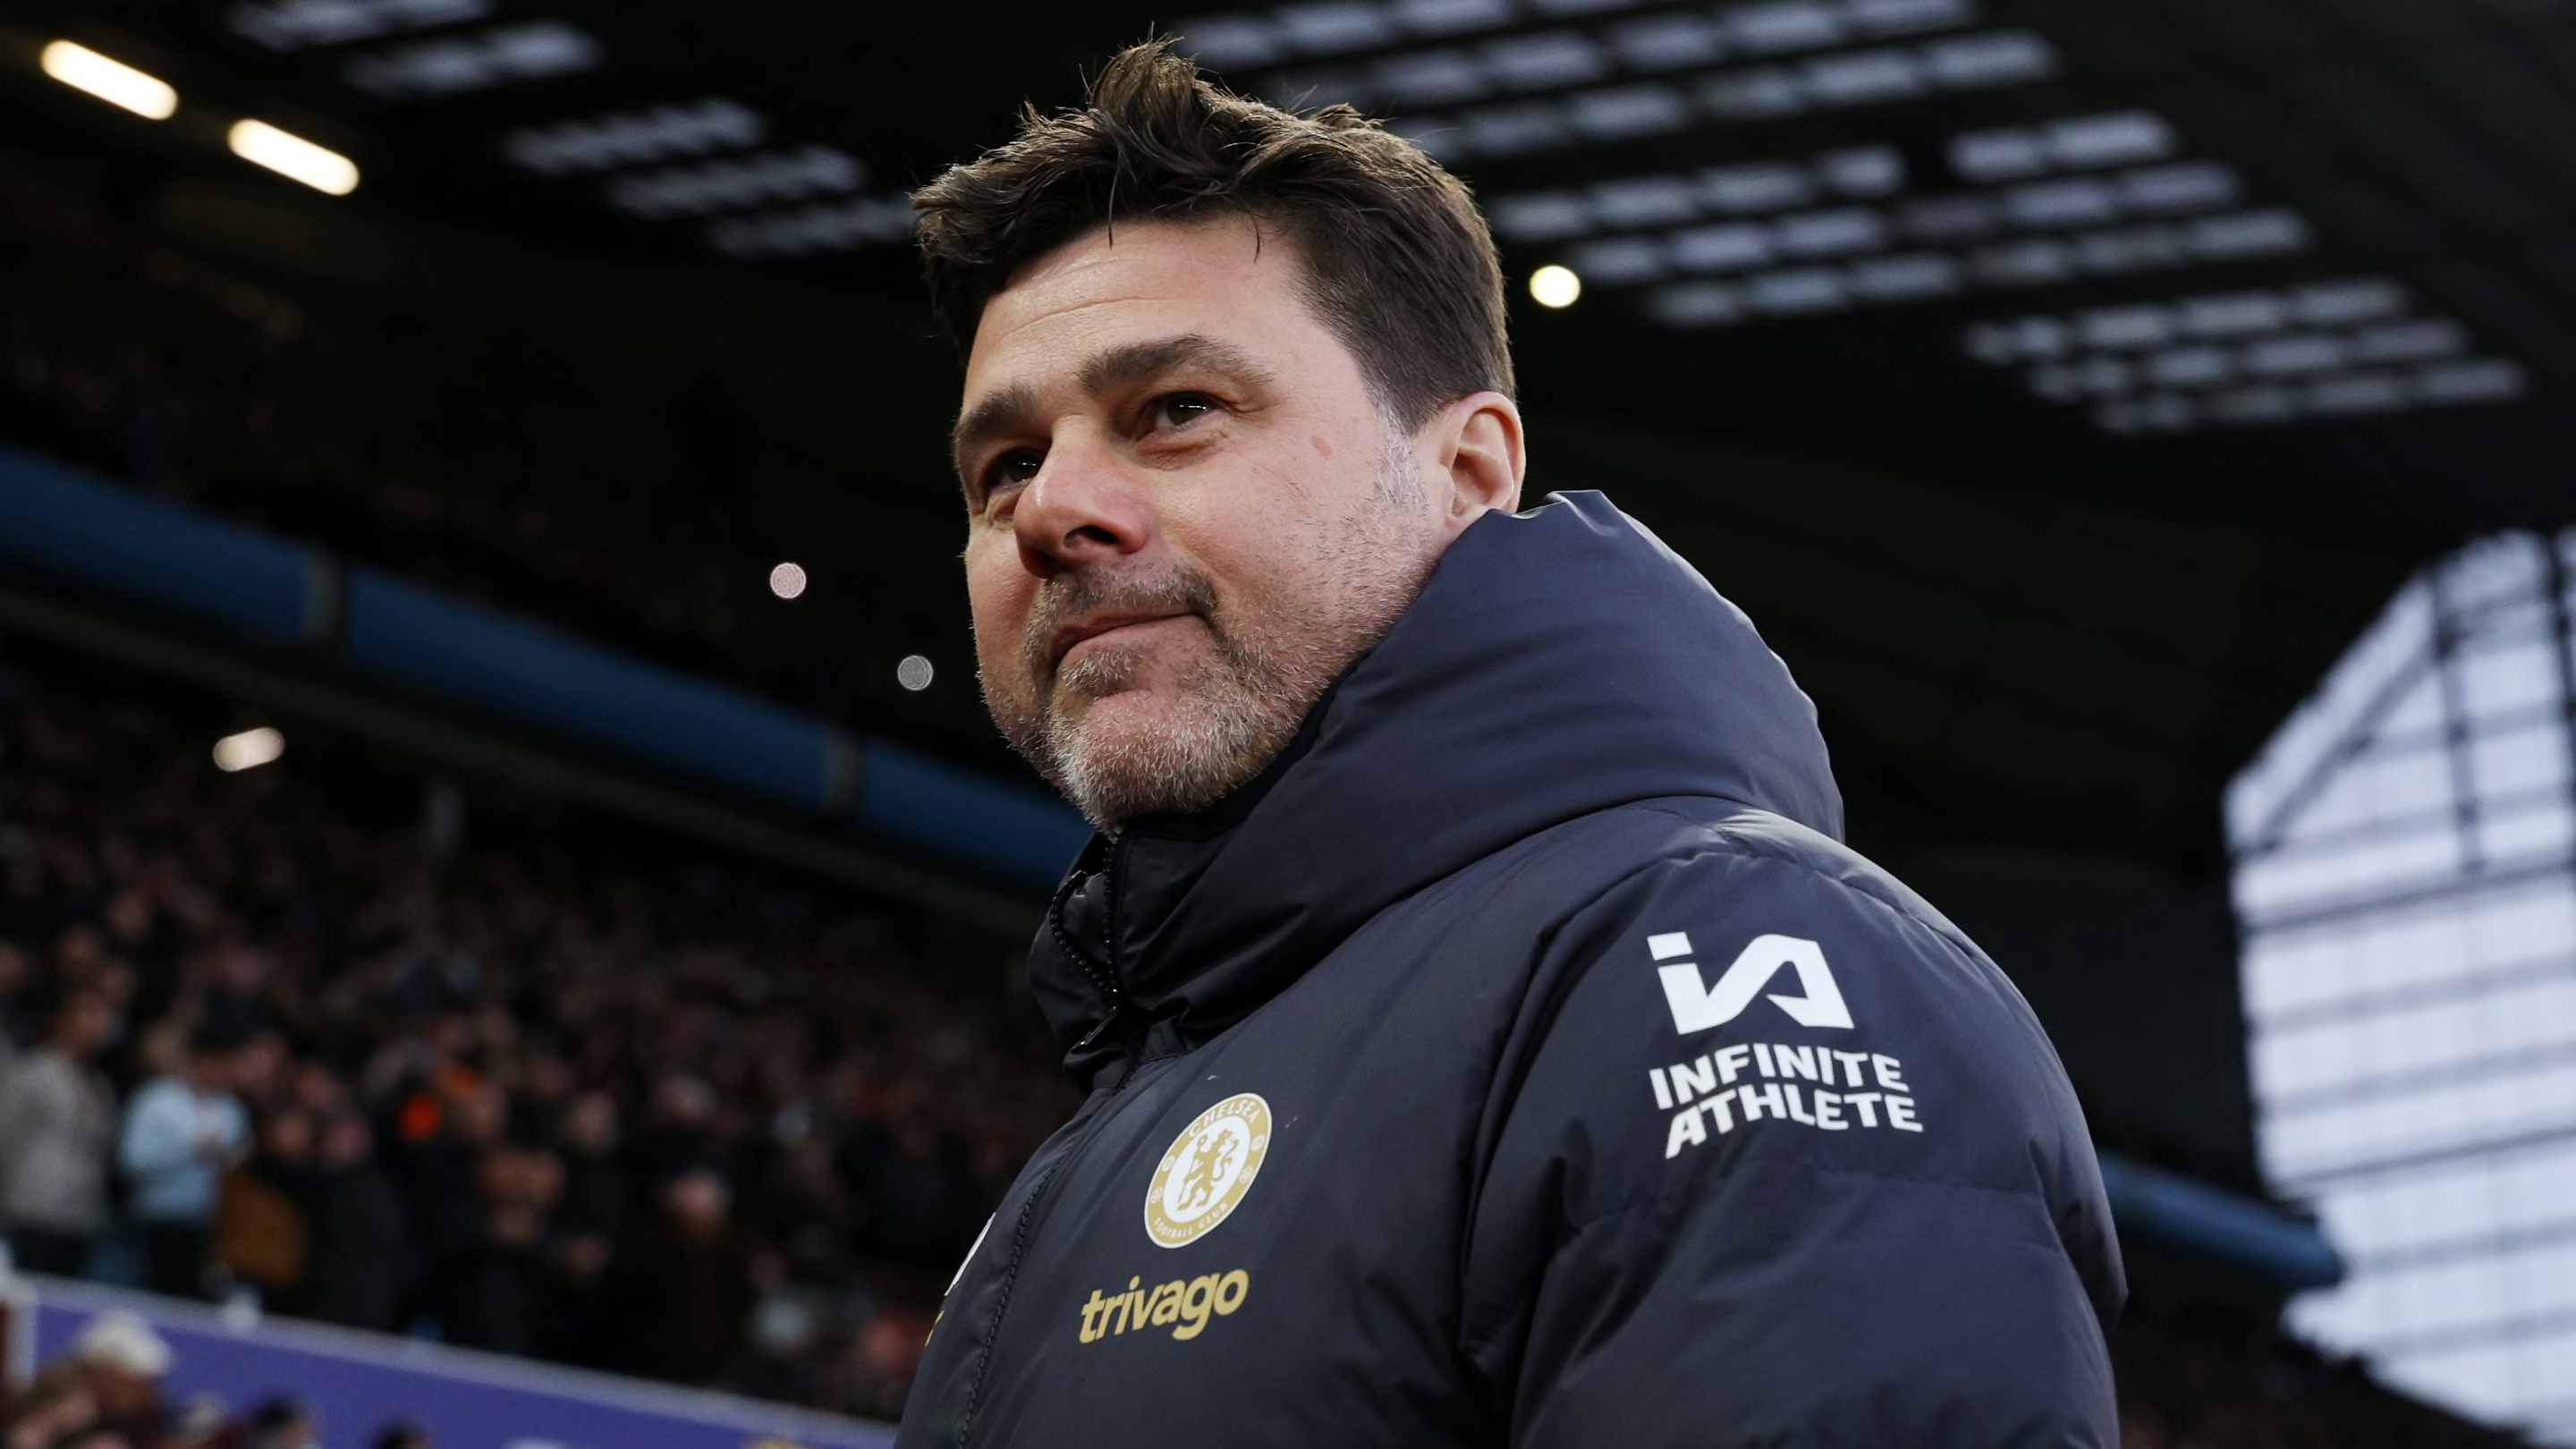 Man Utd 'alerted' to Mauricio Pochettino's availability after Chelsea exit